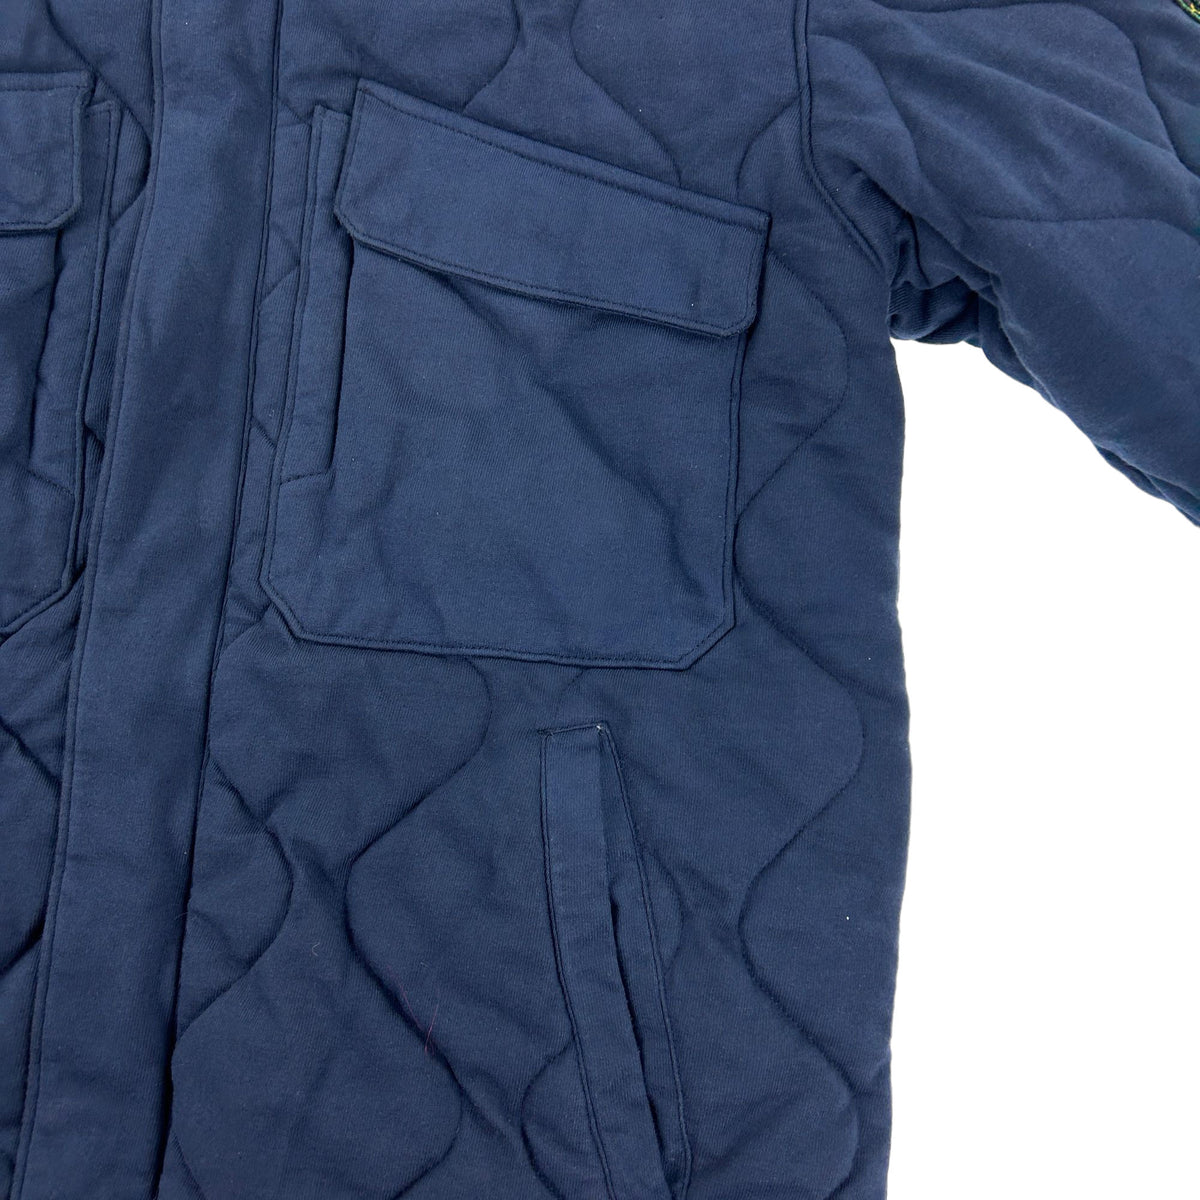 Vintage 1999 Stone Island Quilted Jacket Size L